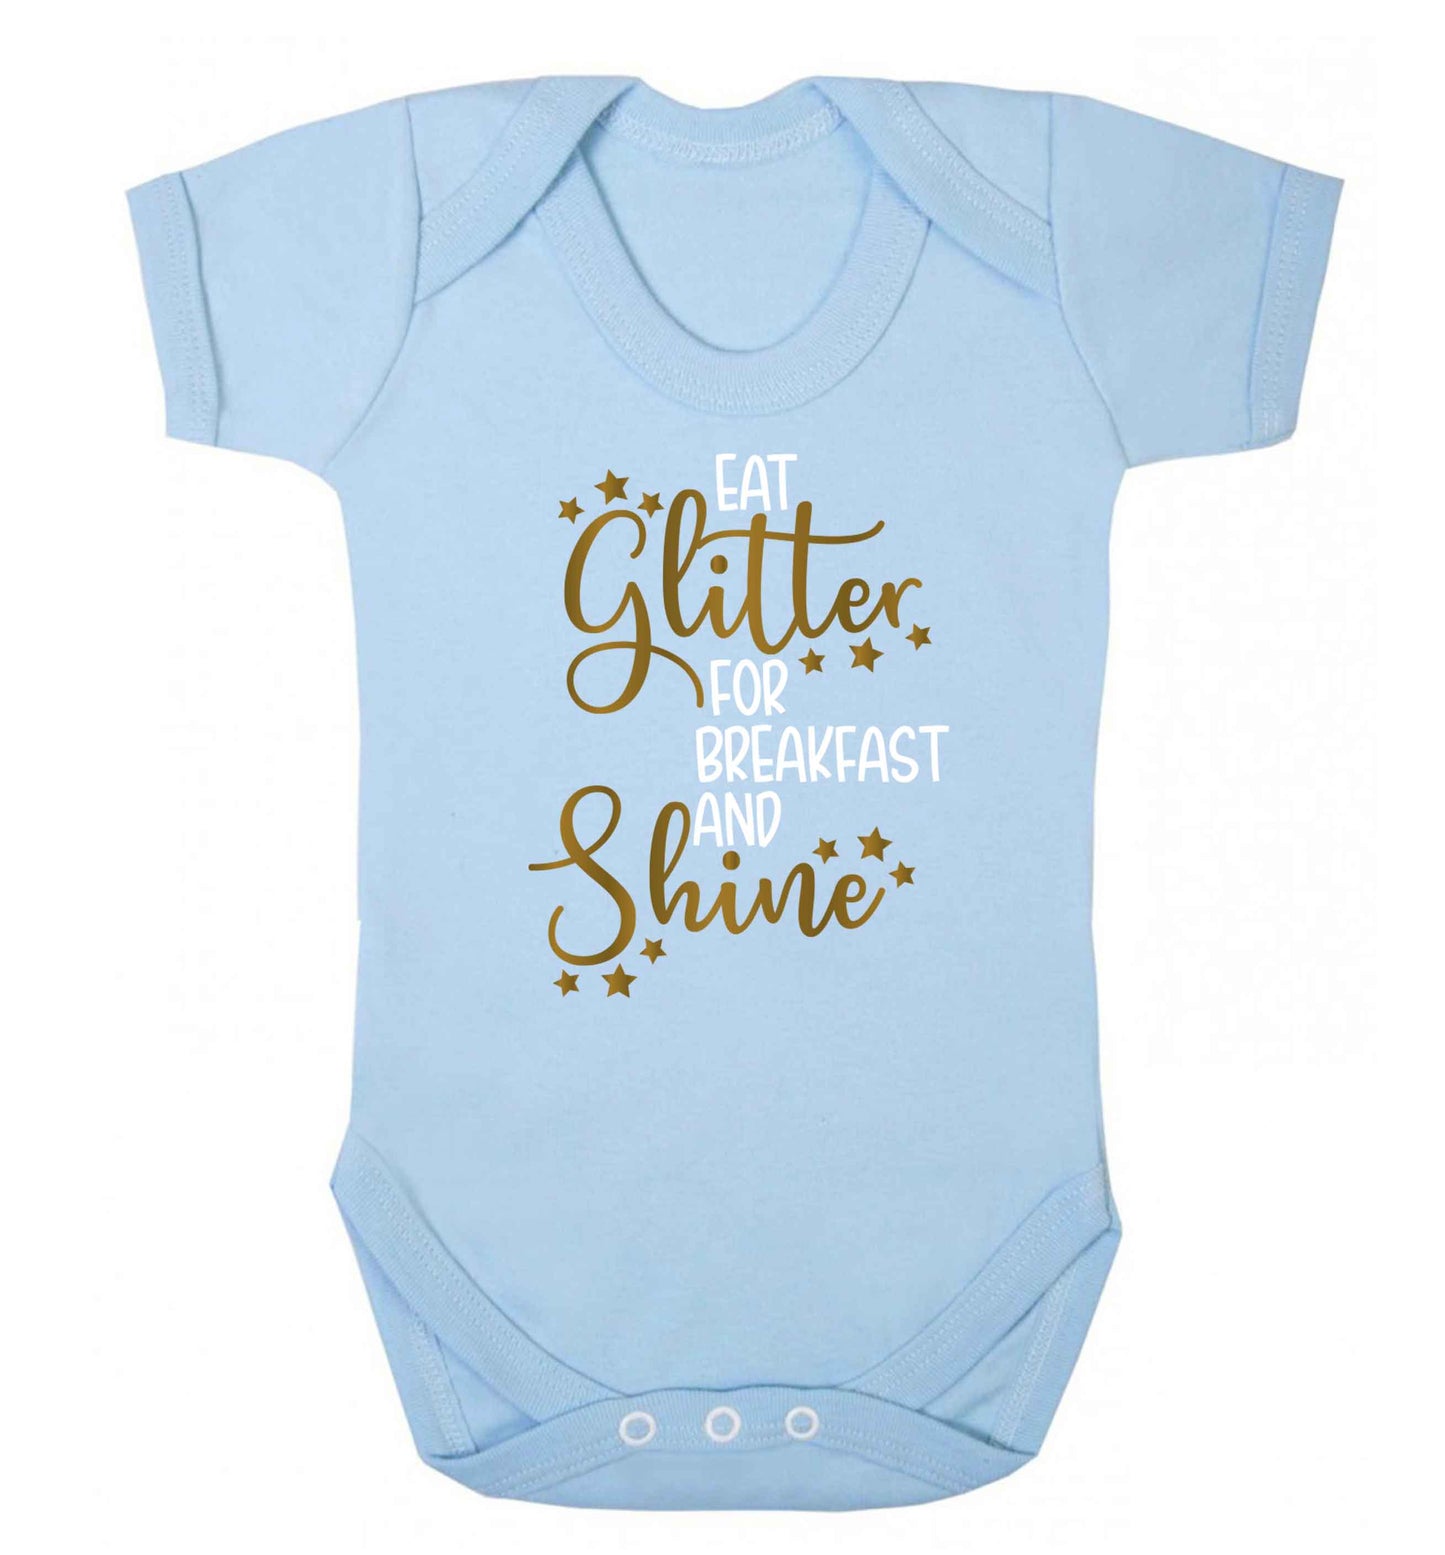 Eat glitter for breakfast and shine all day Baby Vest pale blue 18-24 months